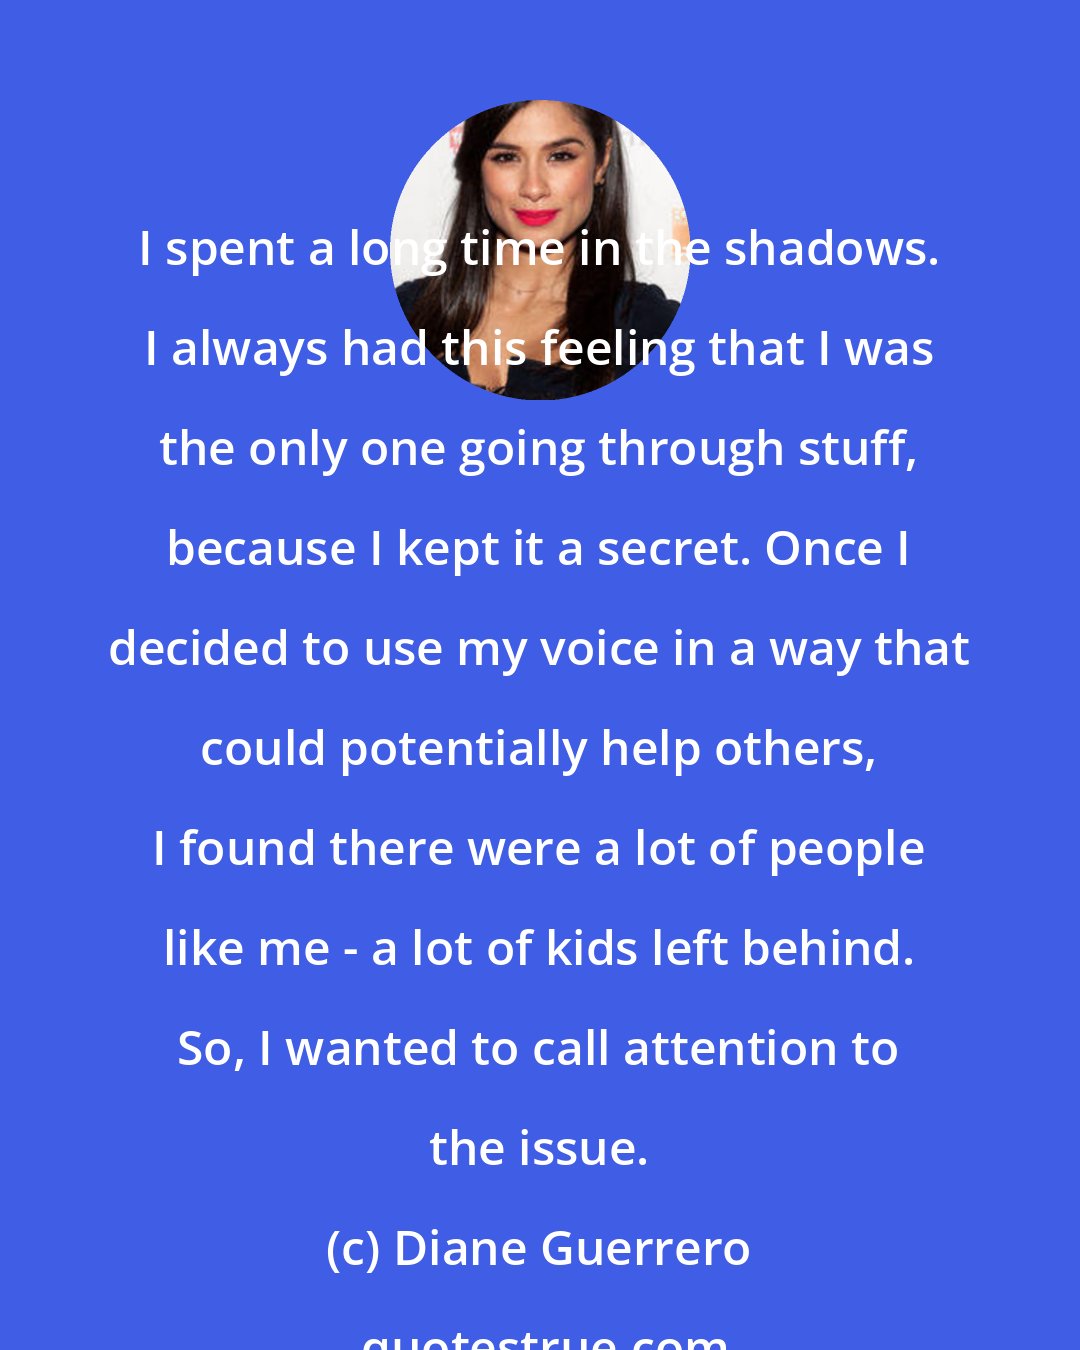 Diane Guerrero: I spent a long time in the shadows. I always had this feeling that I was the only one going through stuff, because I kept it a secret. Once I decided to use my voice in a way that could potentially help others, I found there were a lot of people like me - a lot of kids left behind. So, I wanted to call attention to the issue.